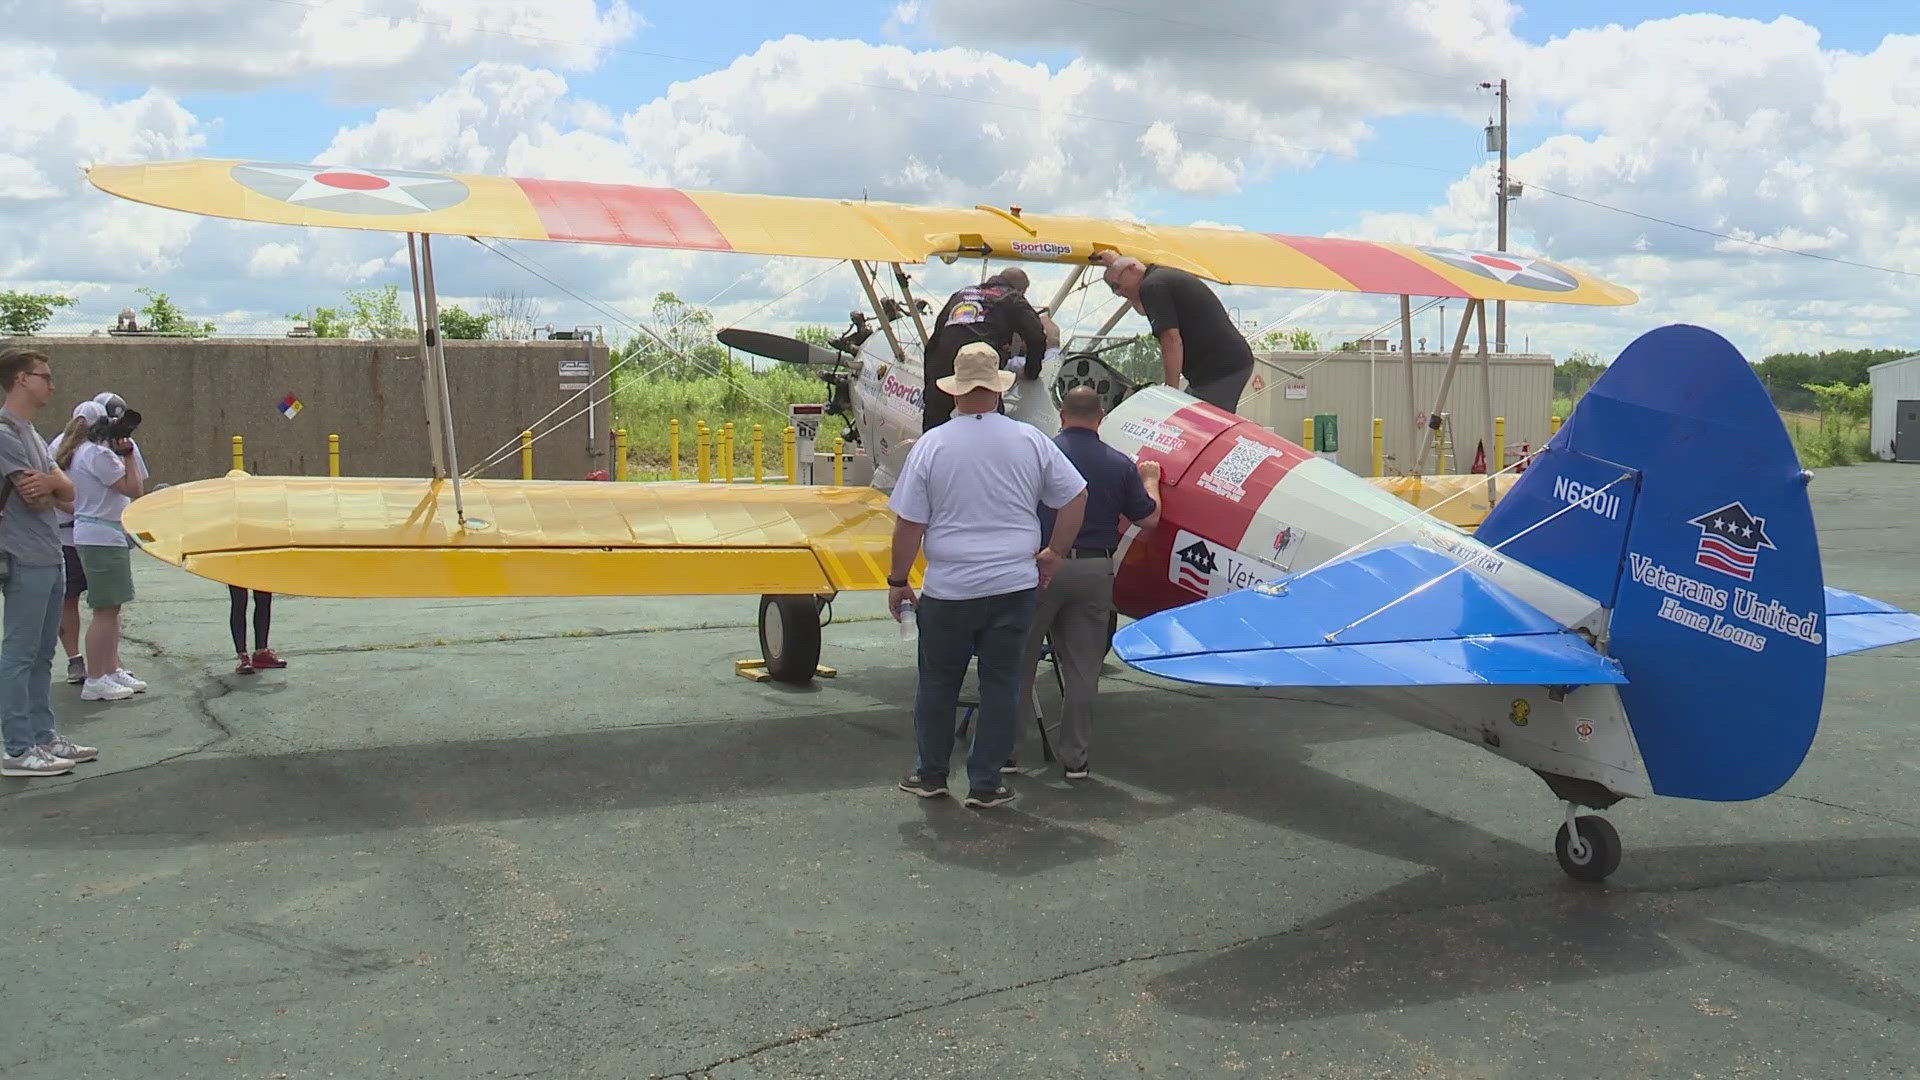 The veterans, ranging in age from 75 to 98, climbed aboard a restored World War II Boeing-Stearman biplane for their flights. Lindsay Buckingham reports.